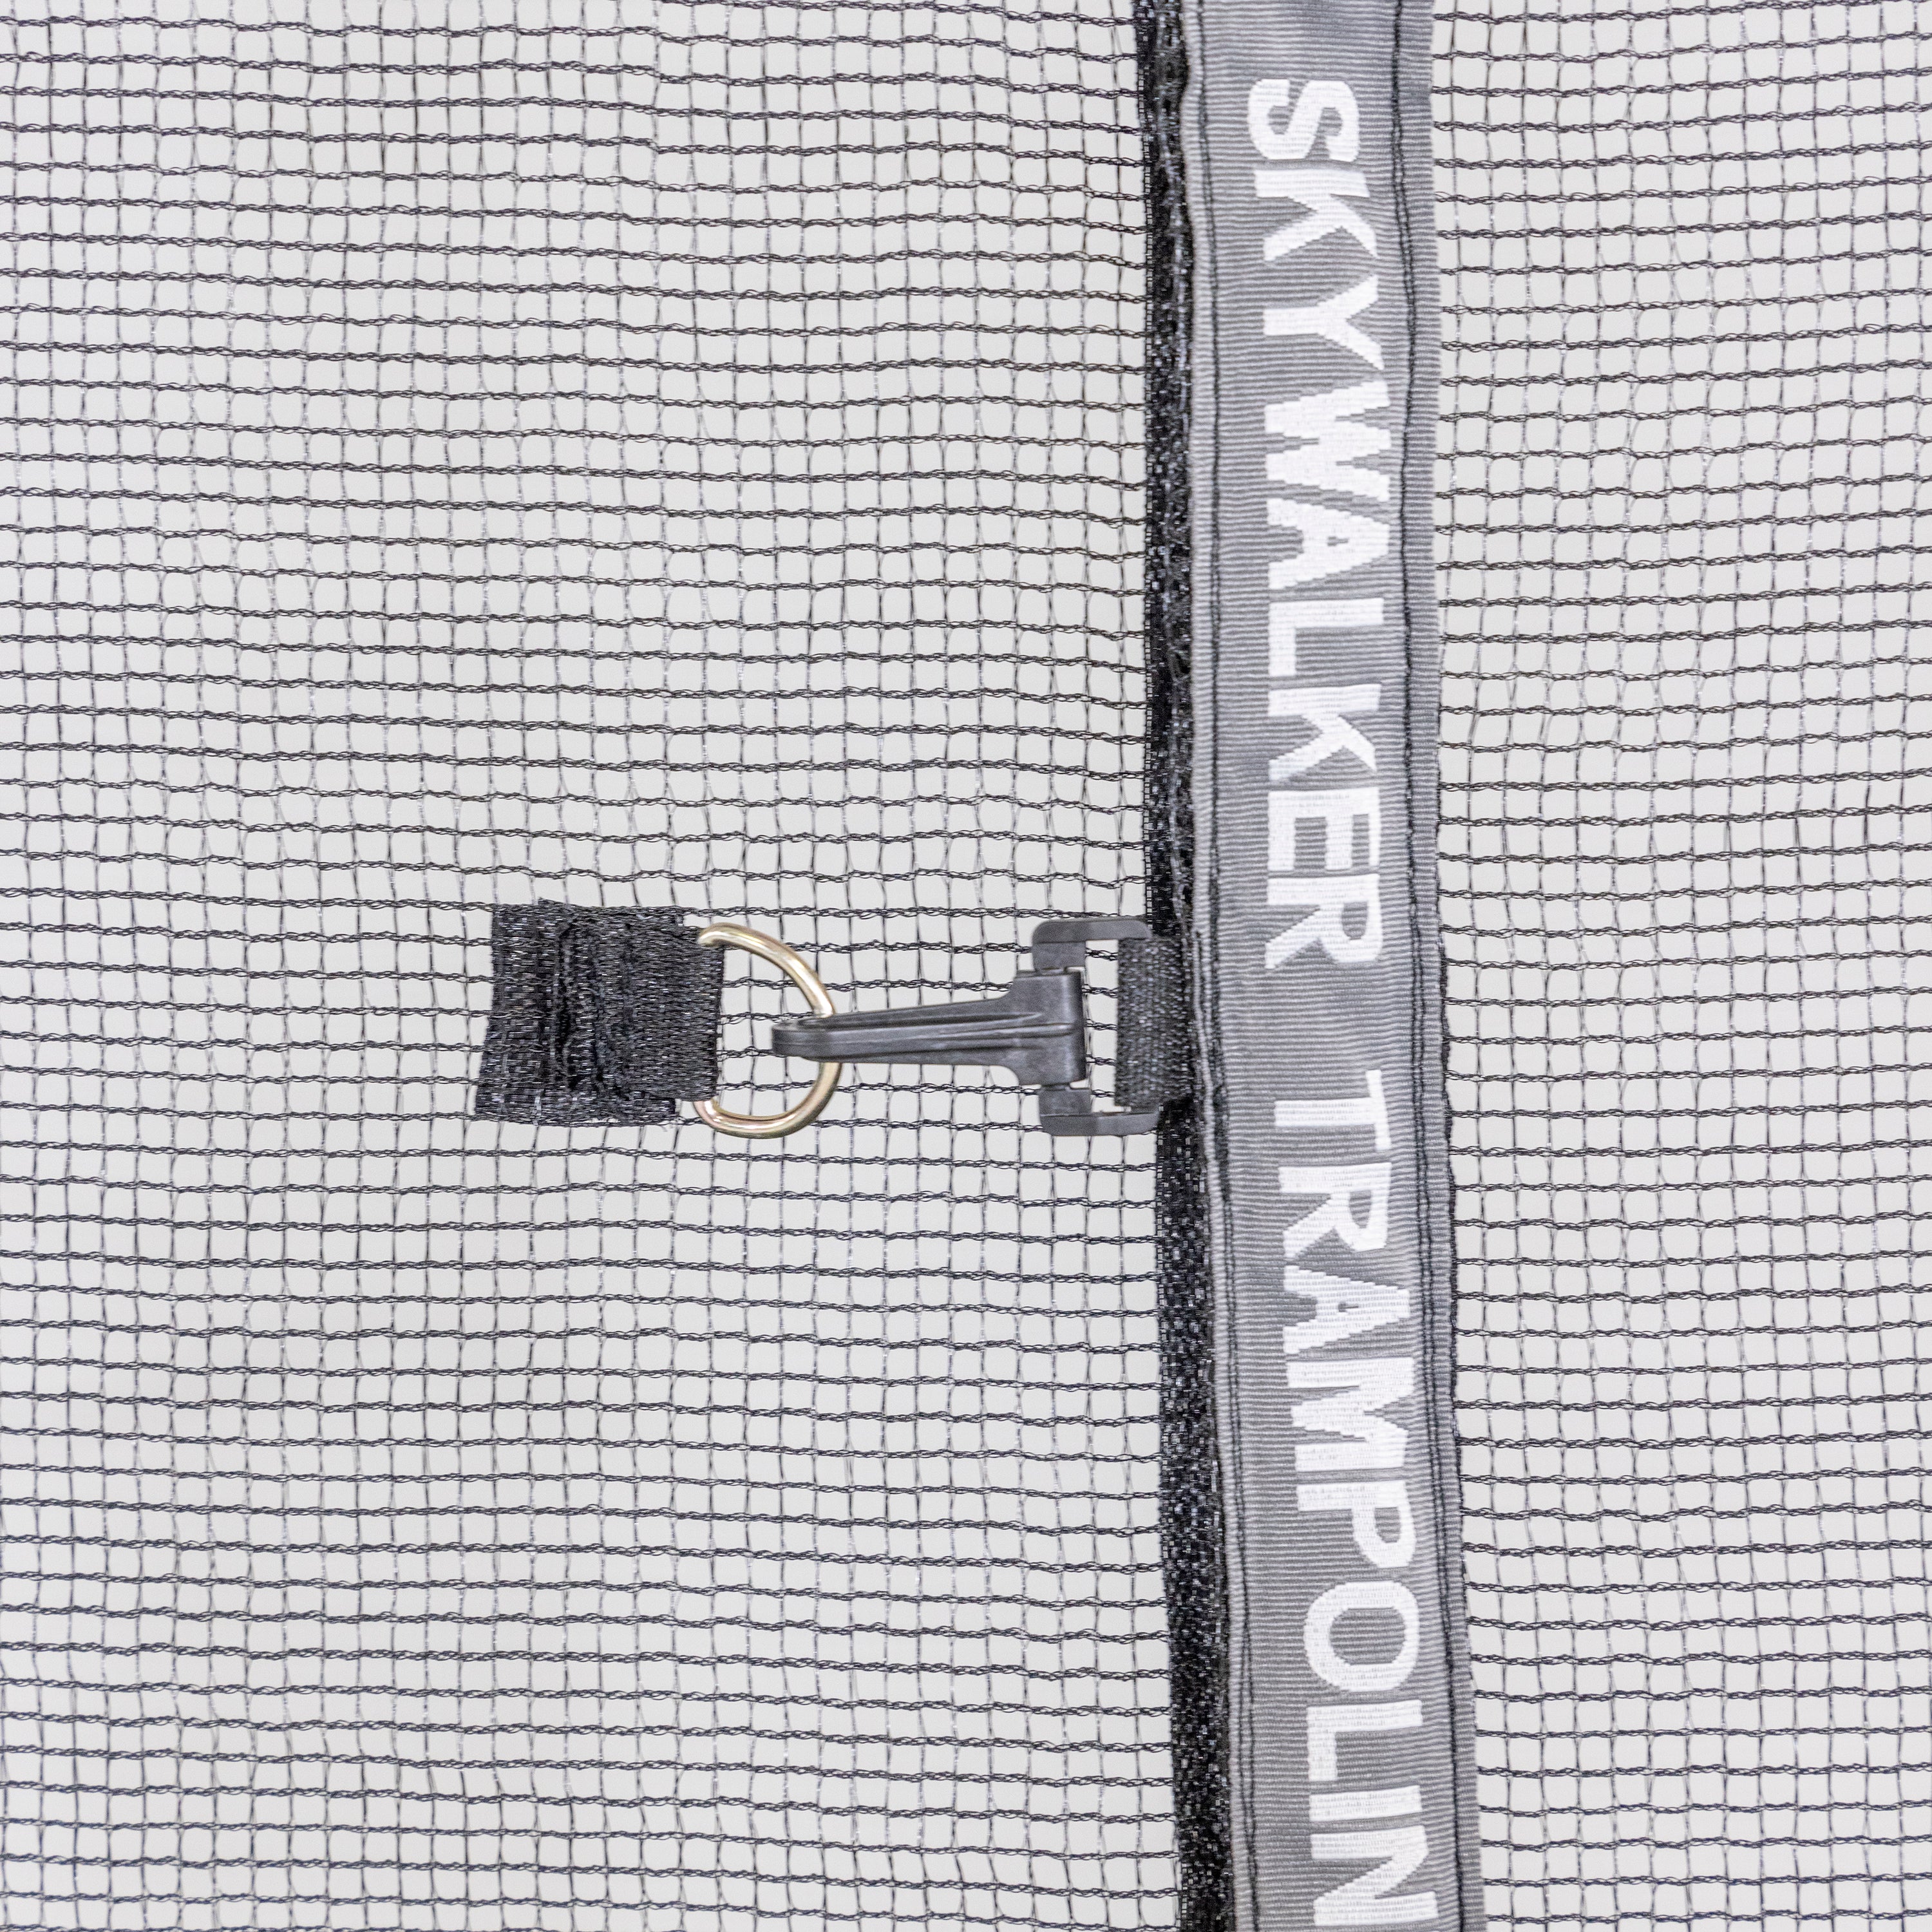 The words "Skywalker Trampolines" are printed onto the trampoline enclosure's zipper.